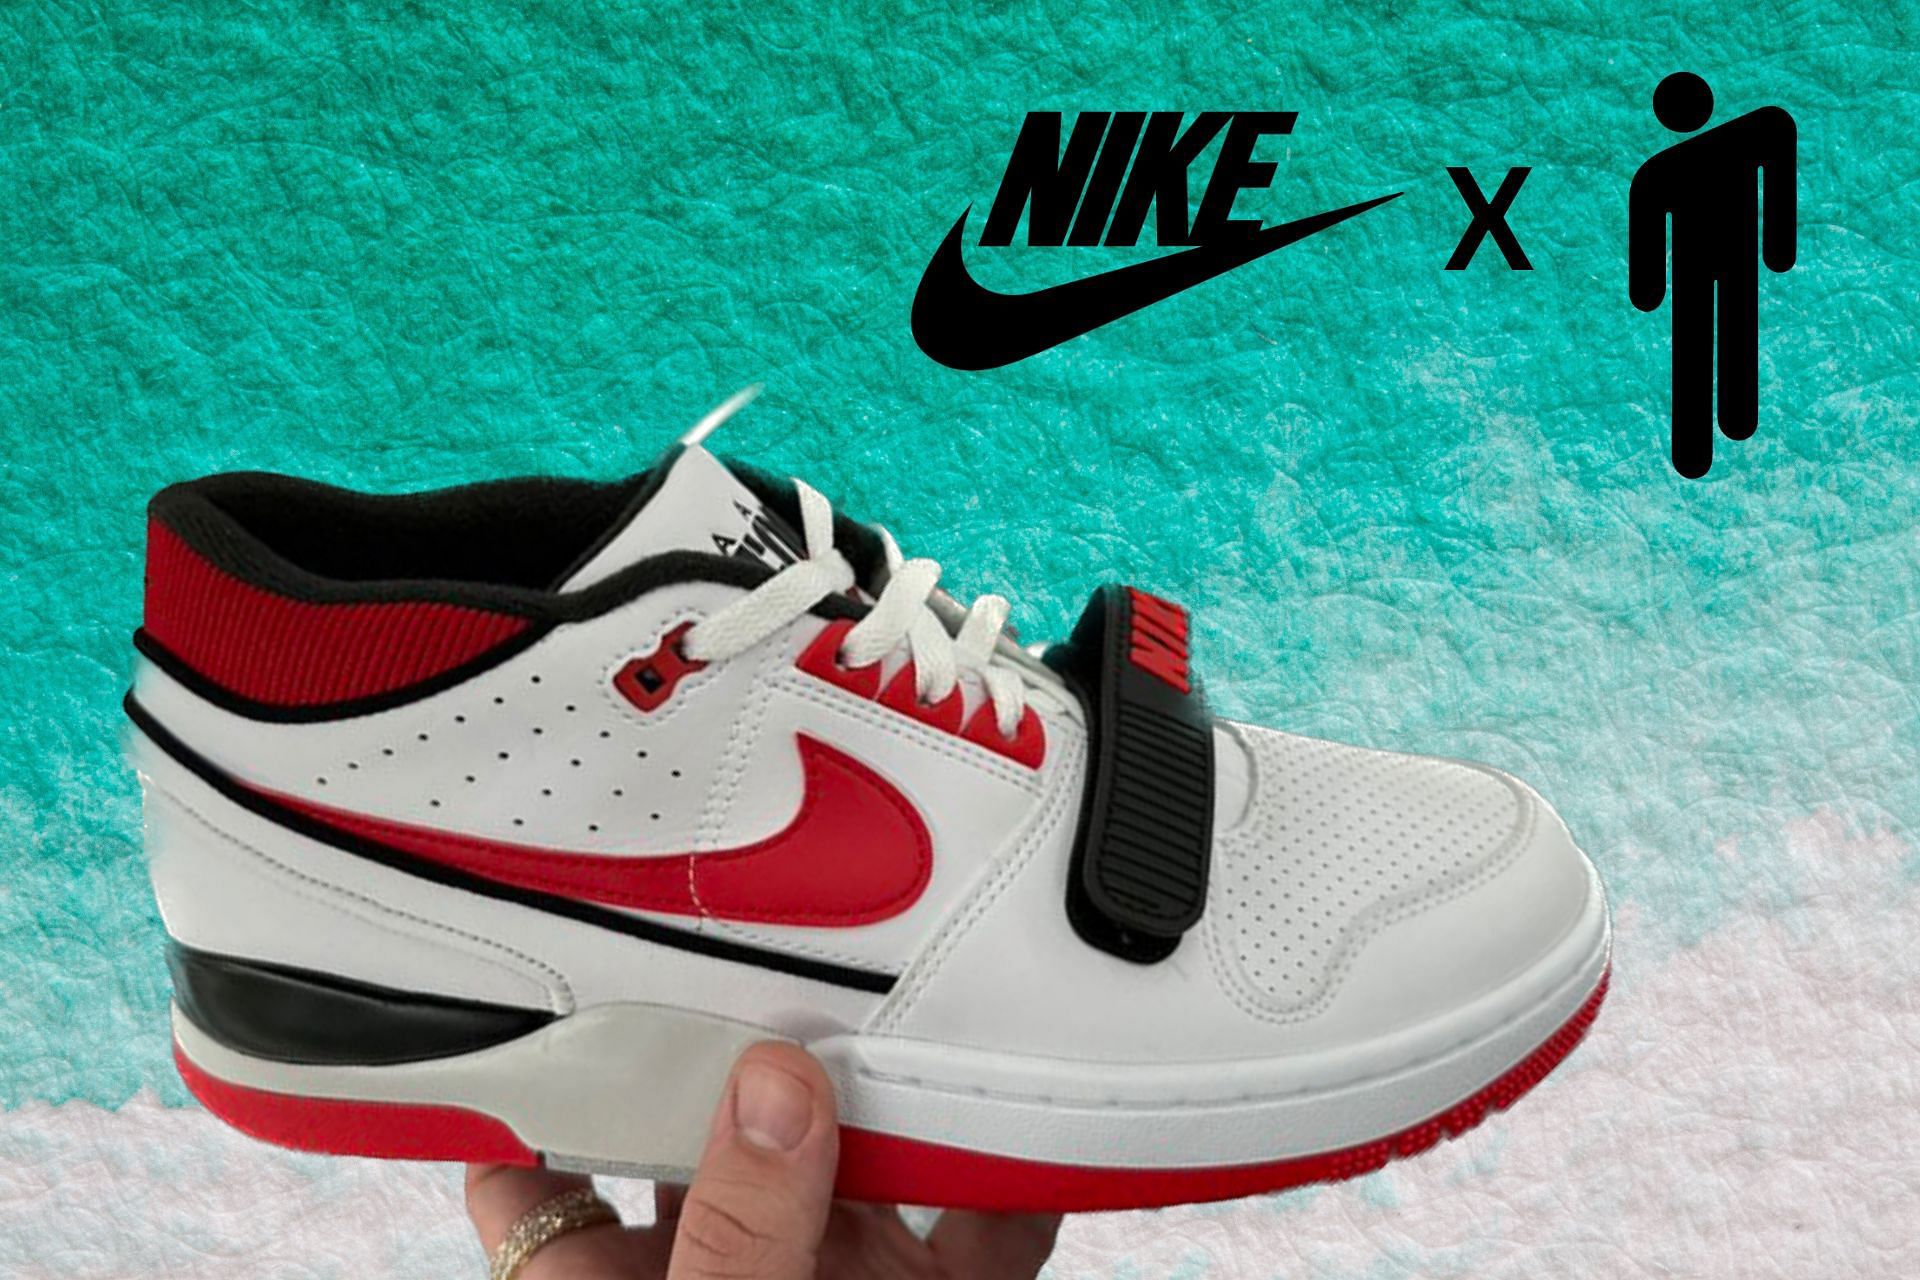 gebonden wij teleurstellen Nike Air Alpha Force: Billie Eilish x Nike Air Alpha Force 1988 SP "Fire  Red" shoes: Where to buy, price, and more details explored